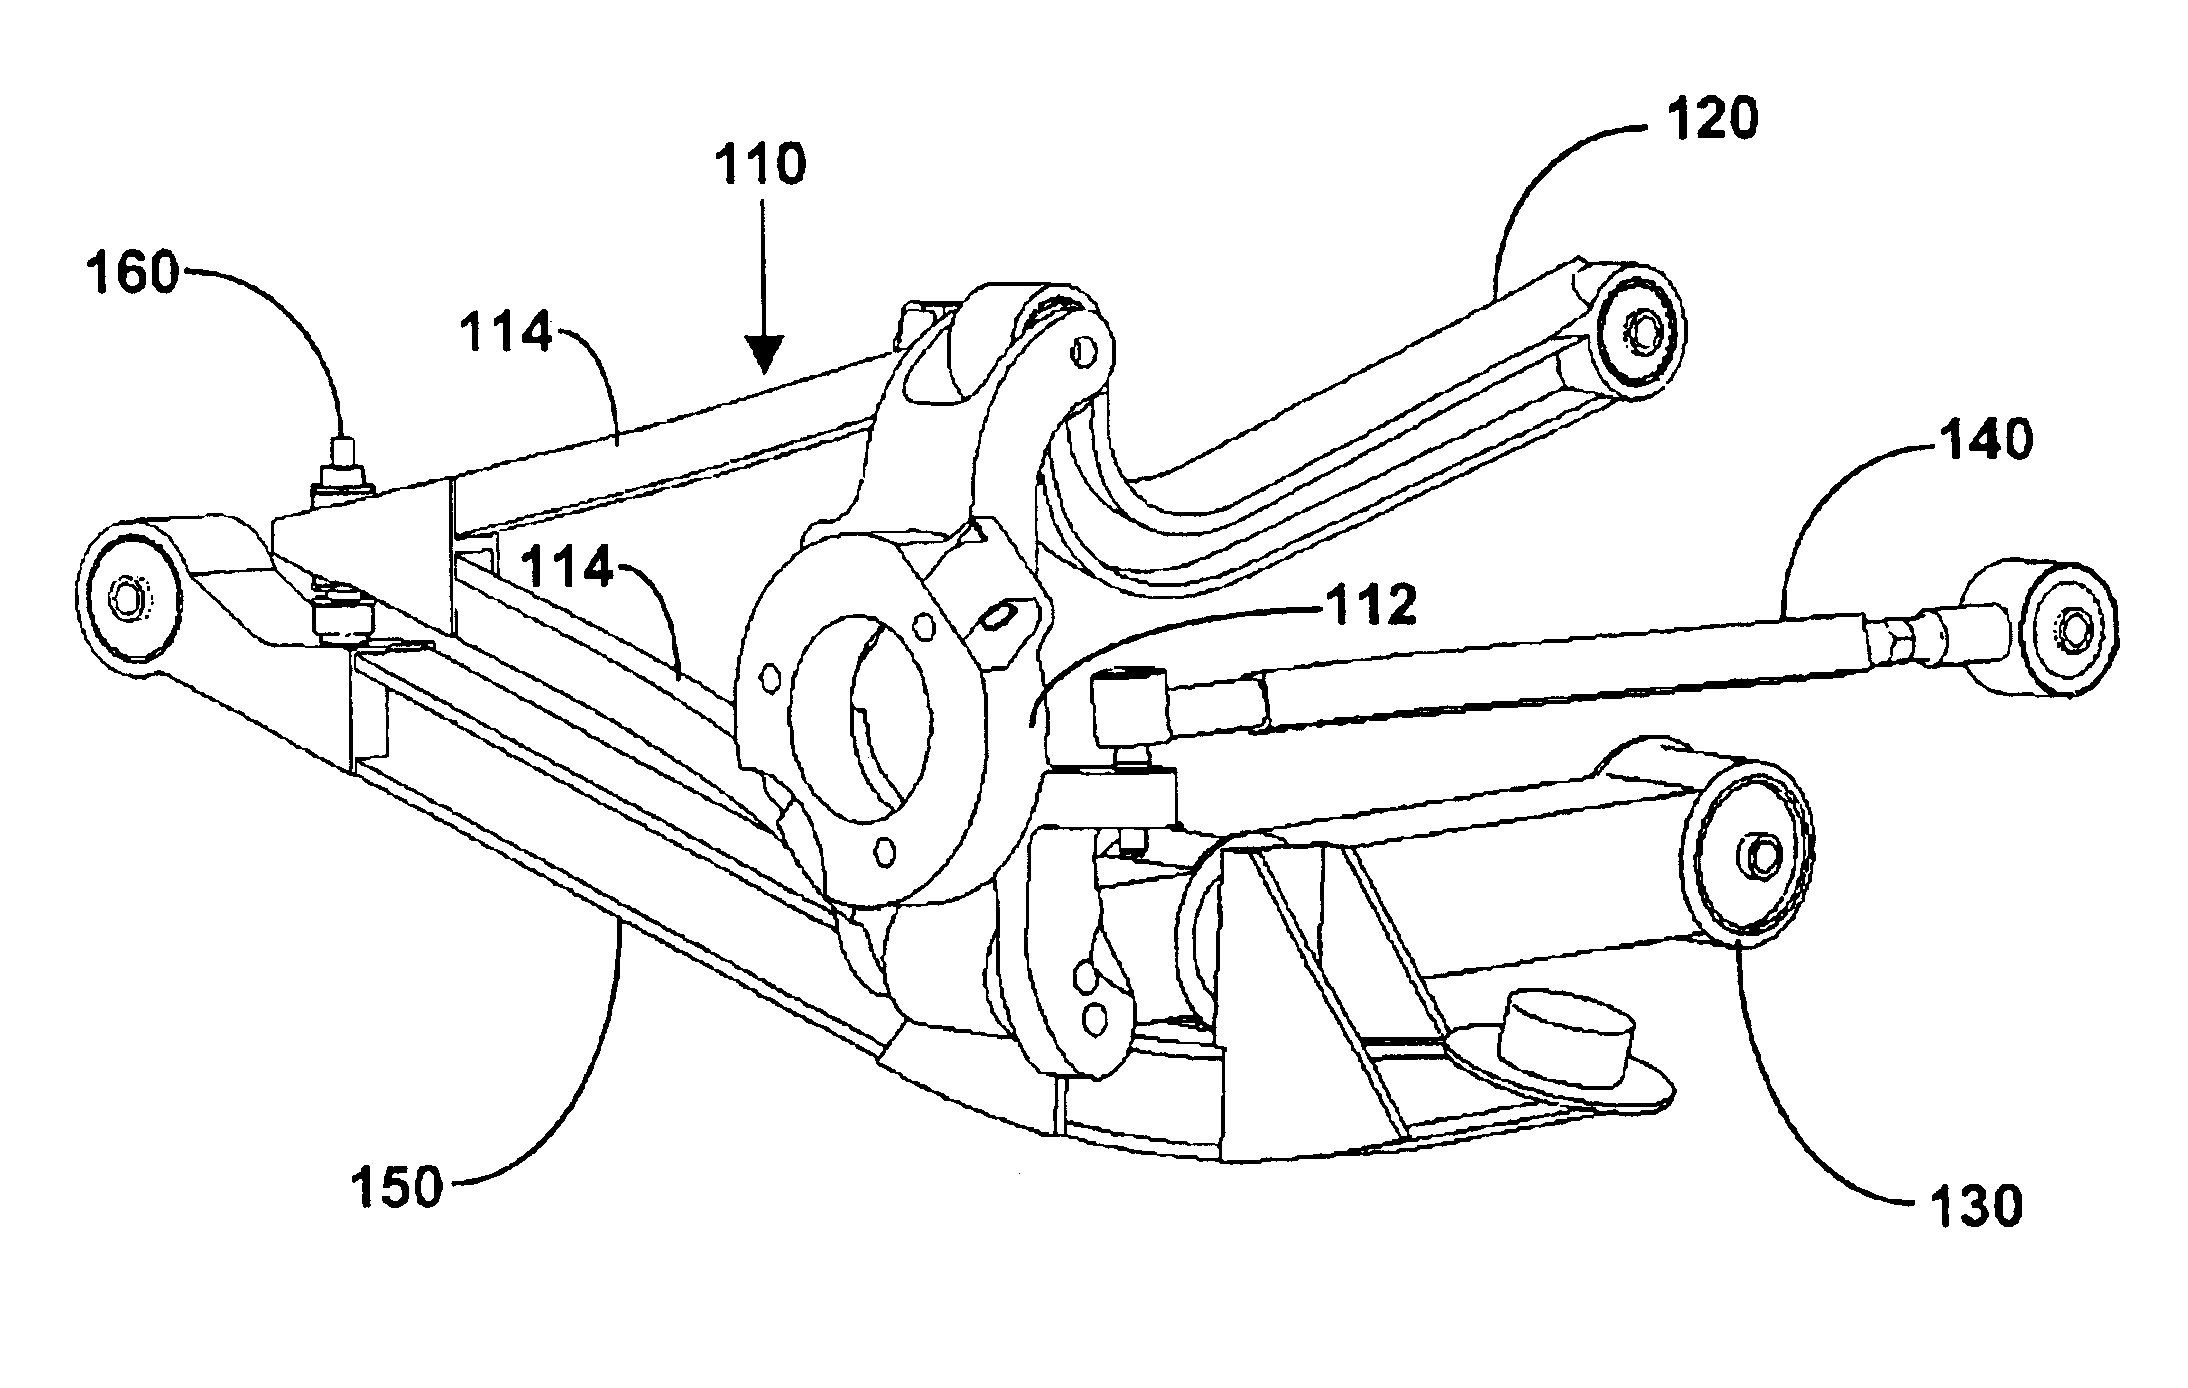 Multi-link independent rear suspension assembly